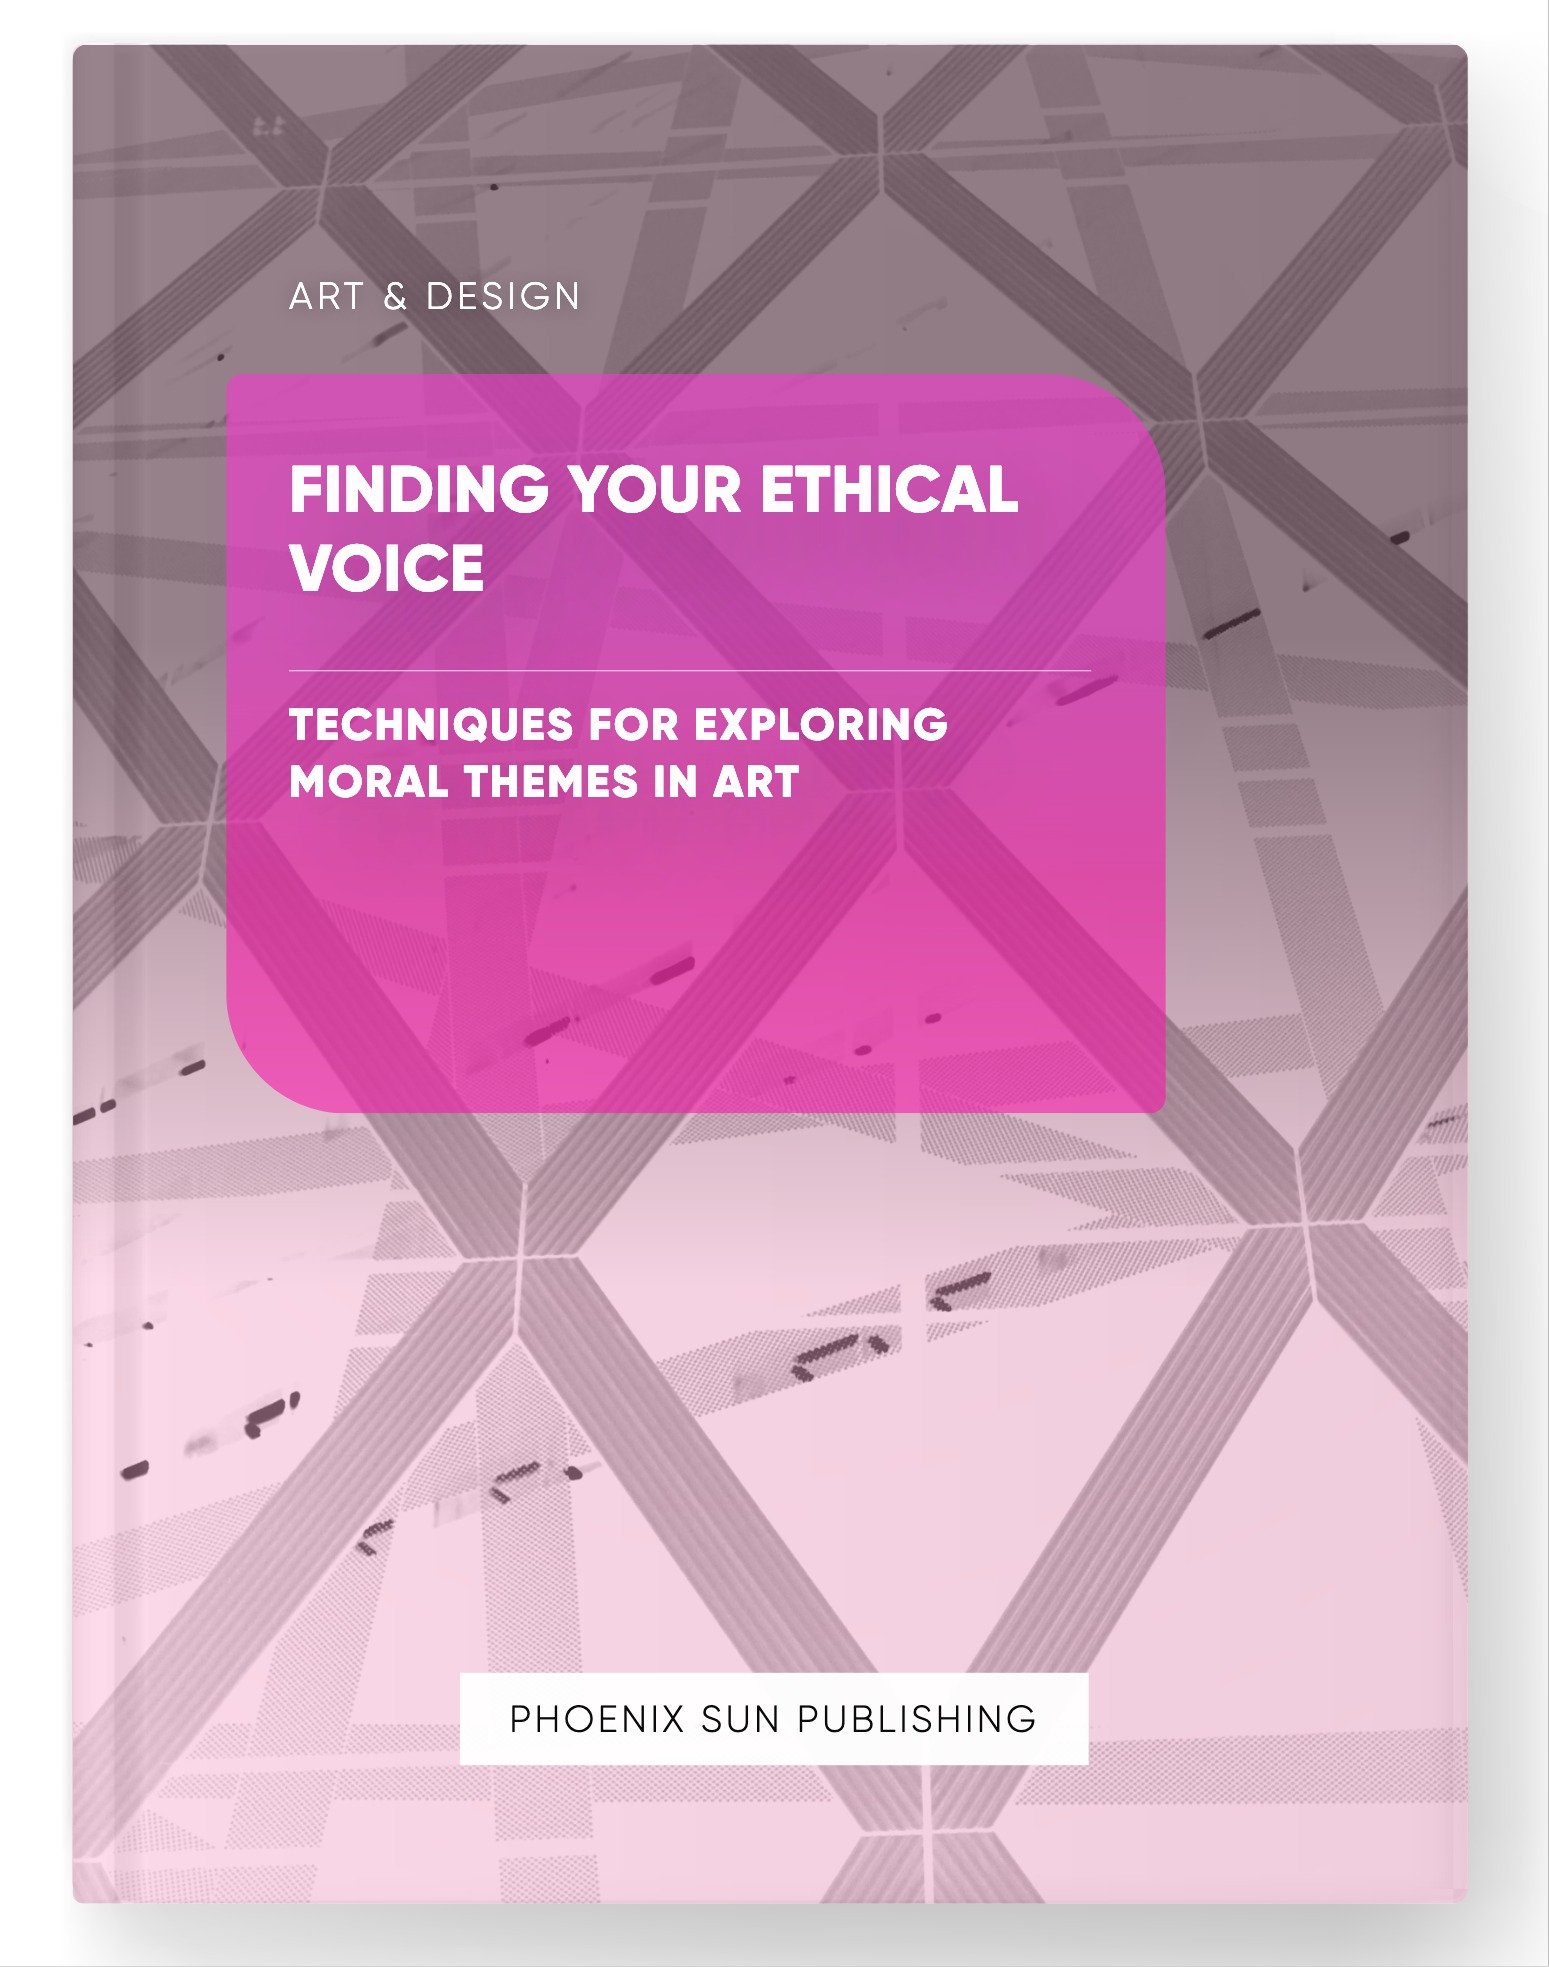 Finding Your Ethical Voice – Techniques for Exploring Moral Themes in Art